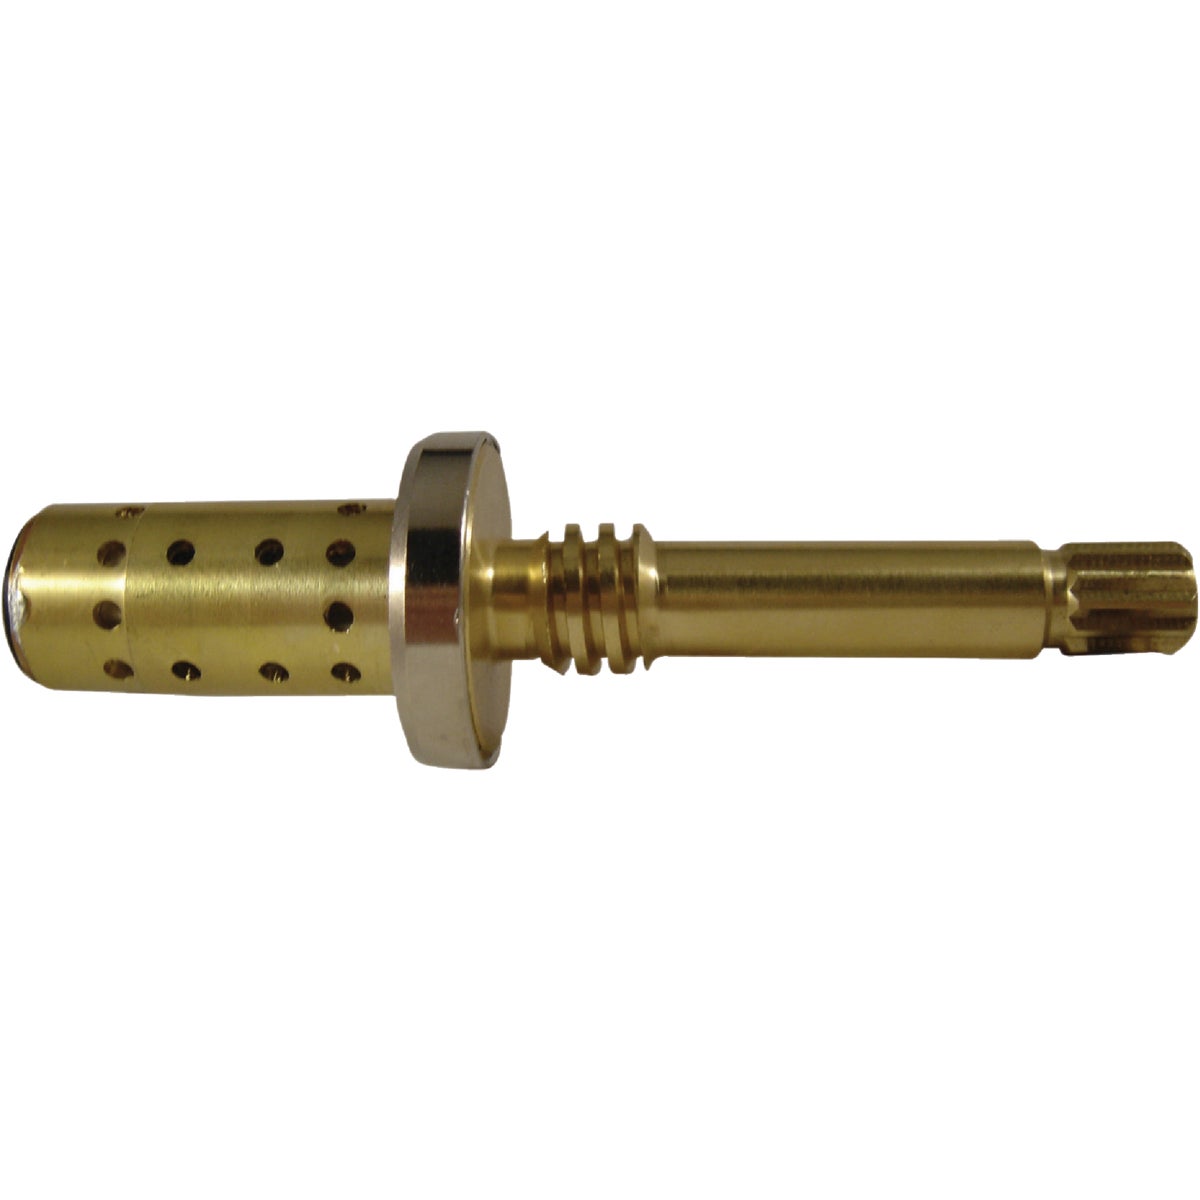 Item 402354, Spindle for Symmons TempTrol single-handle faucets.